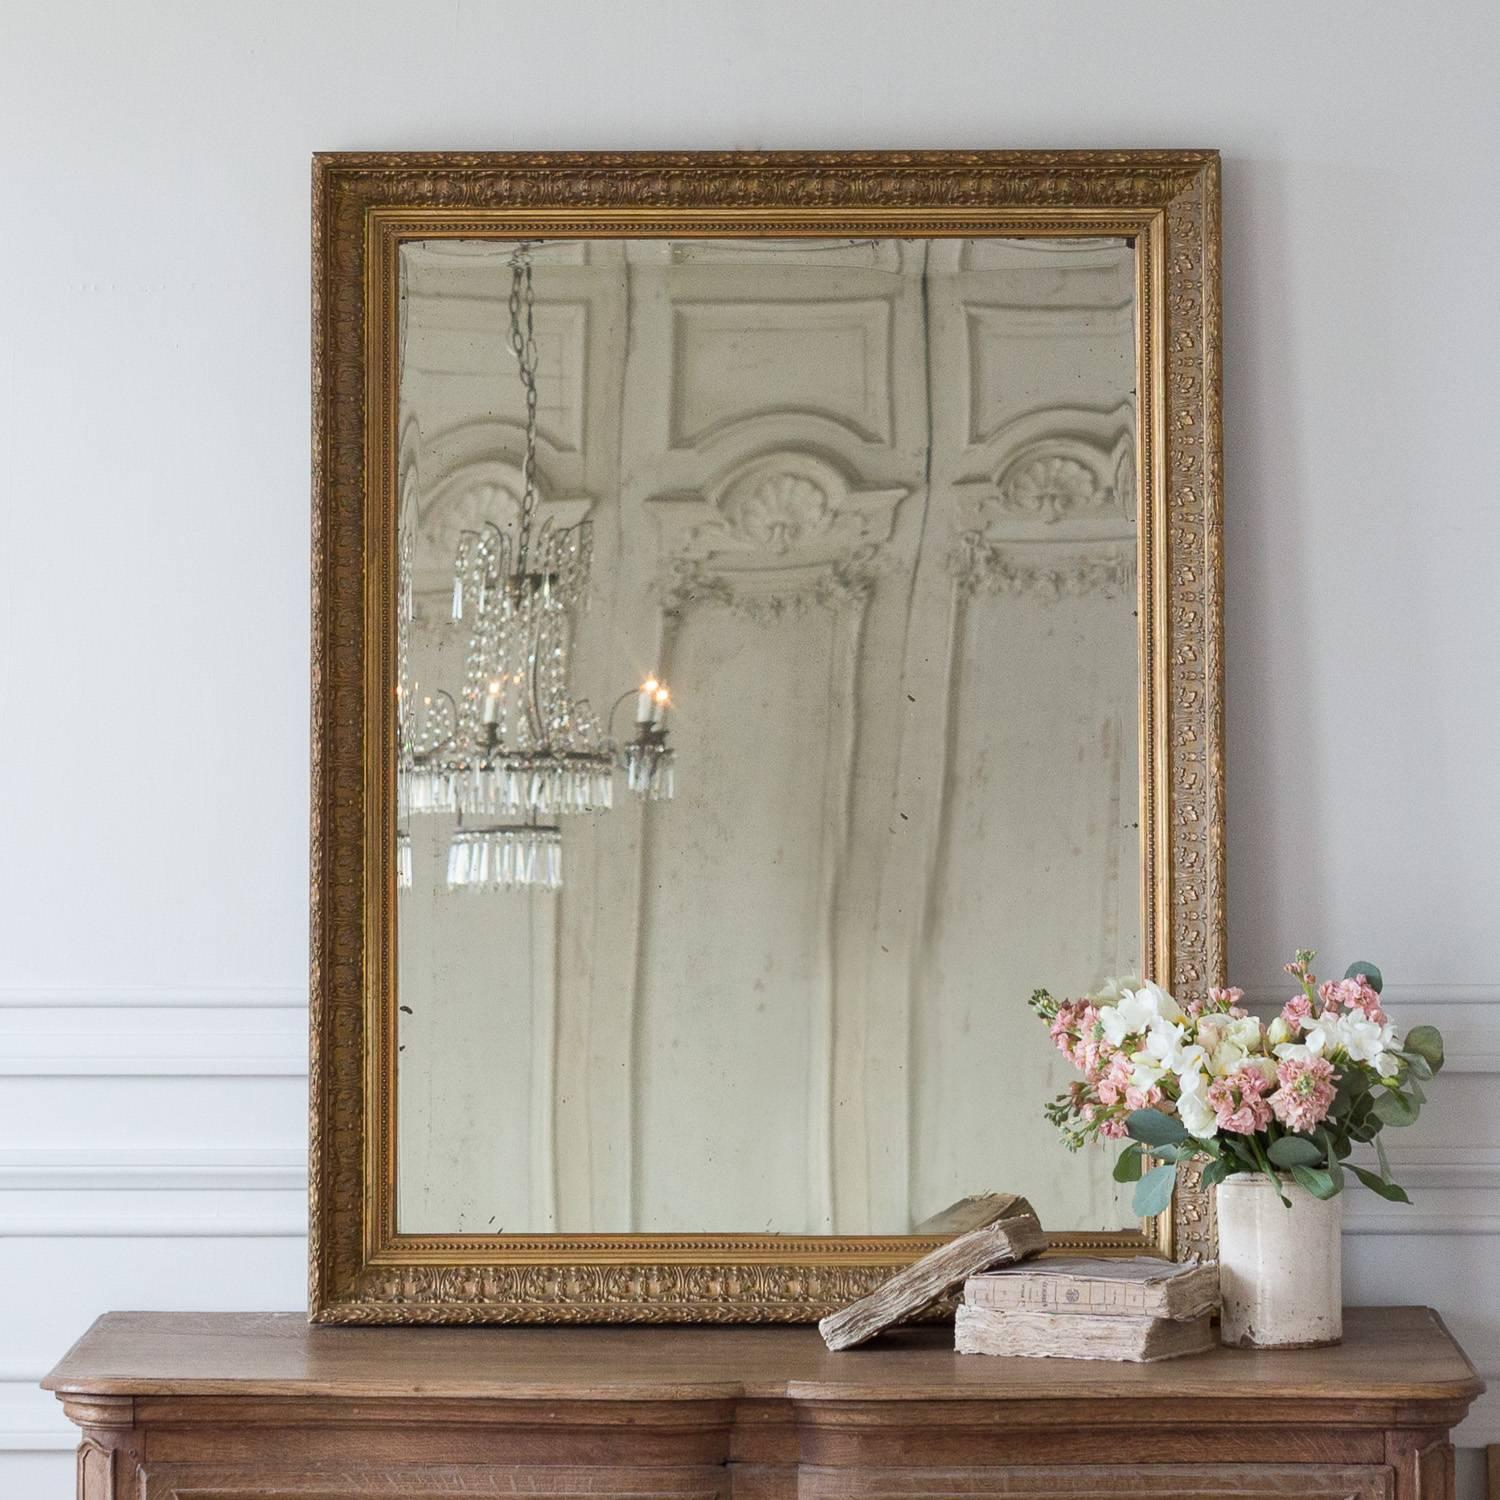 This simple framed antique mirror with beveled glass has a thick frame with repeating floral and leaf motif. Small beads surround the inner frame. The glass has yellowed somewhat. Sweet addition to an entryway or hallway.